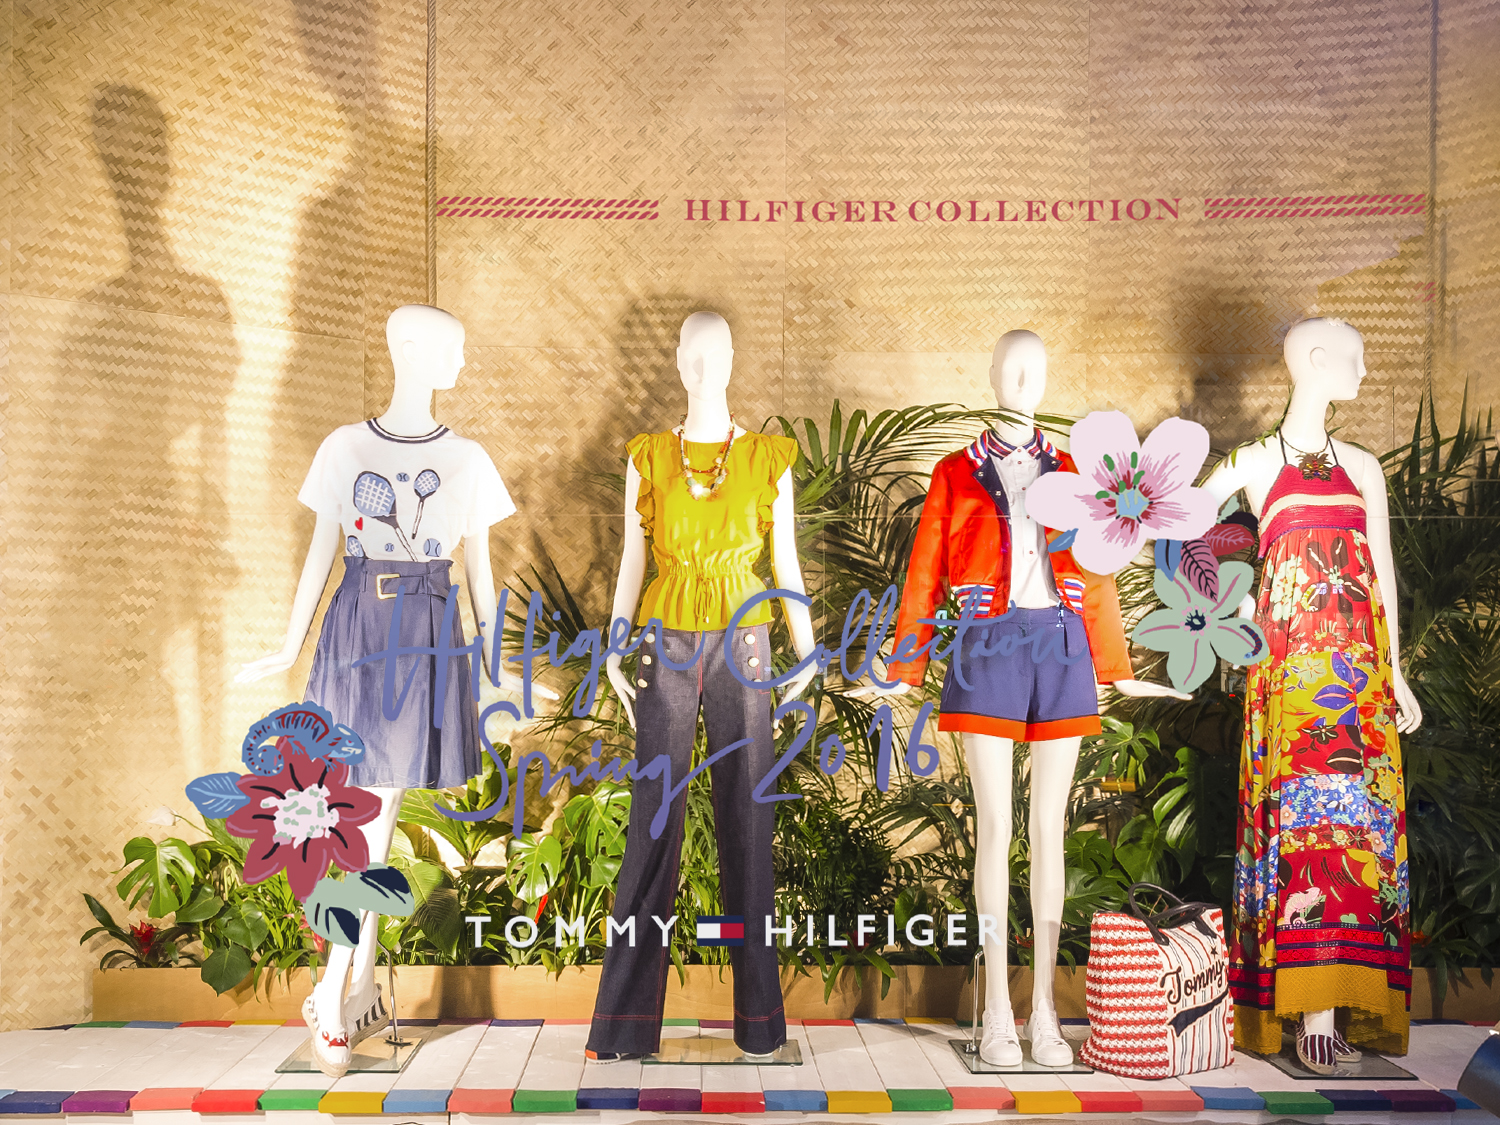 Dfrost, Tommy Hilfiger, Kadewe, Window campaign, PopUp, Collection, Brand Space, Retail, Island vibes, Summer